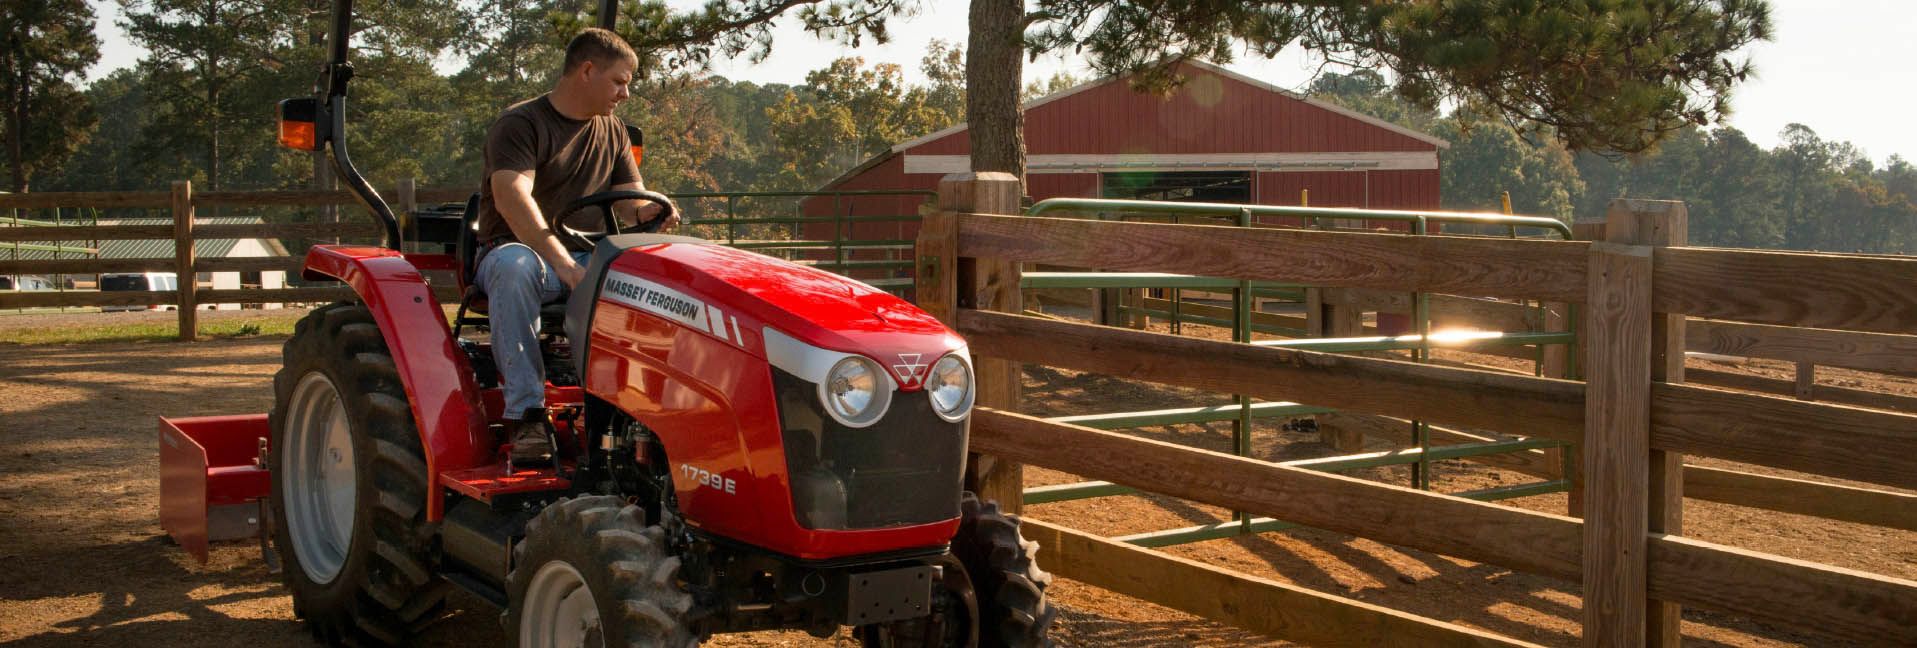 Compact Tractors can mean big utility around the acreage